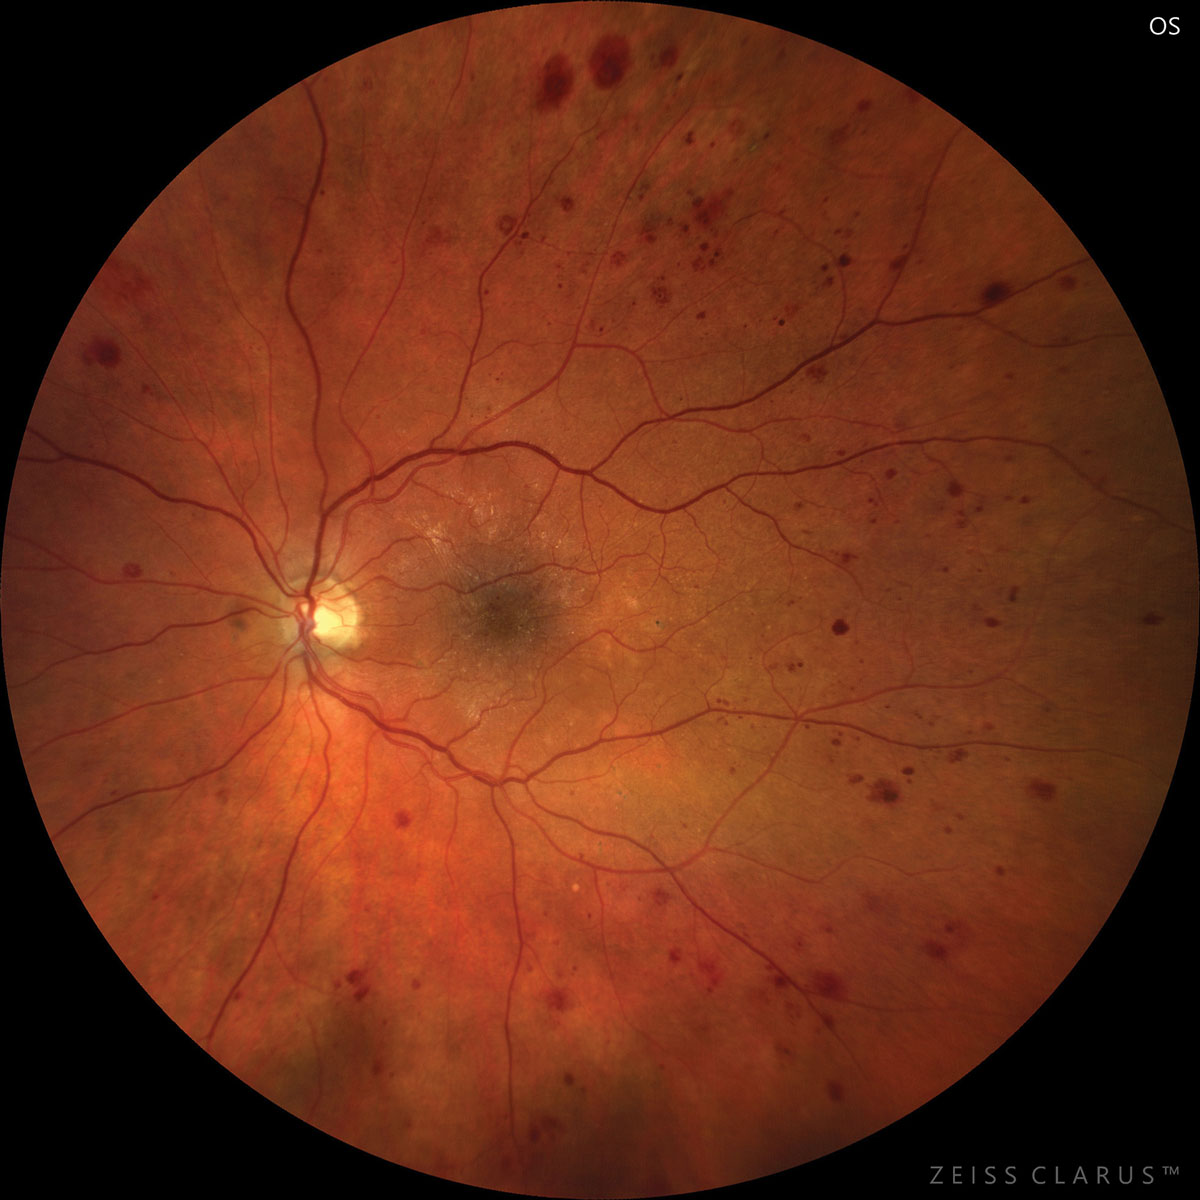 Oxidative stress that occurs from diabetic retinopathy may also contribute to lenticular changes. Photo: Jay Haynie, OD.